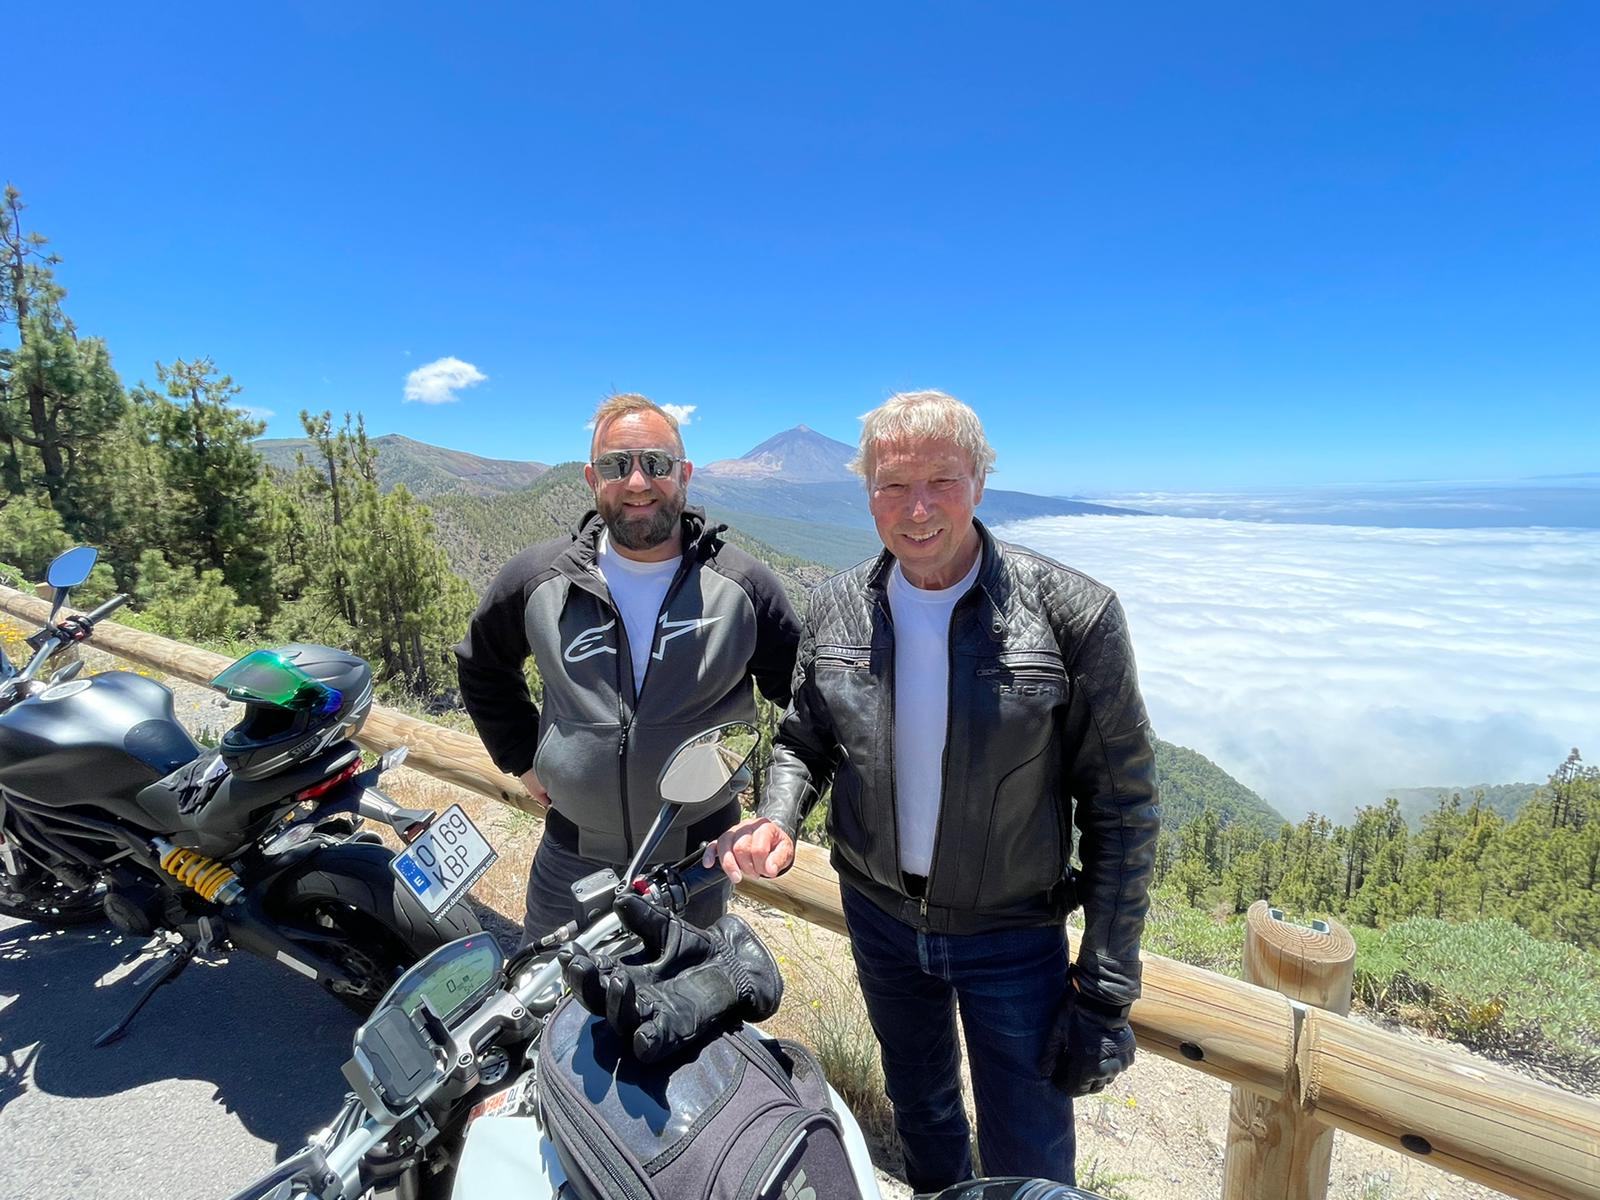 Two men are standing next to a motorcycle on top of a hill.